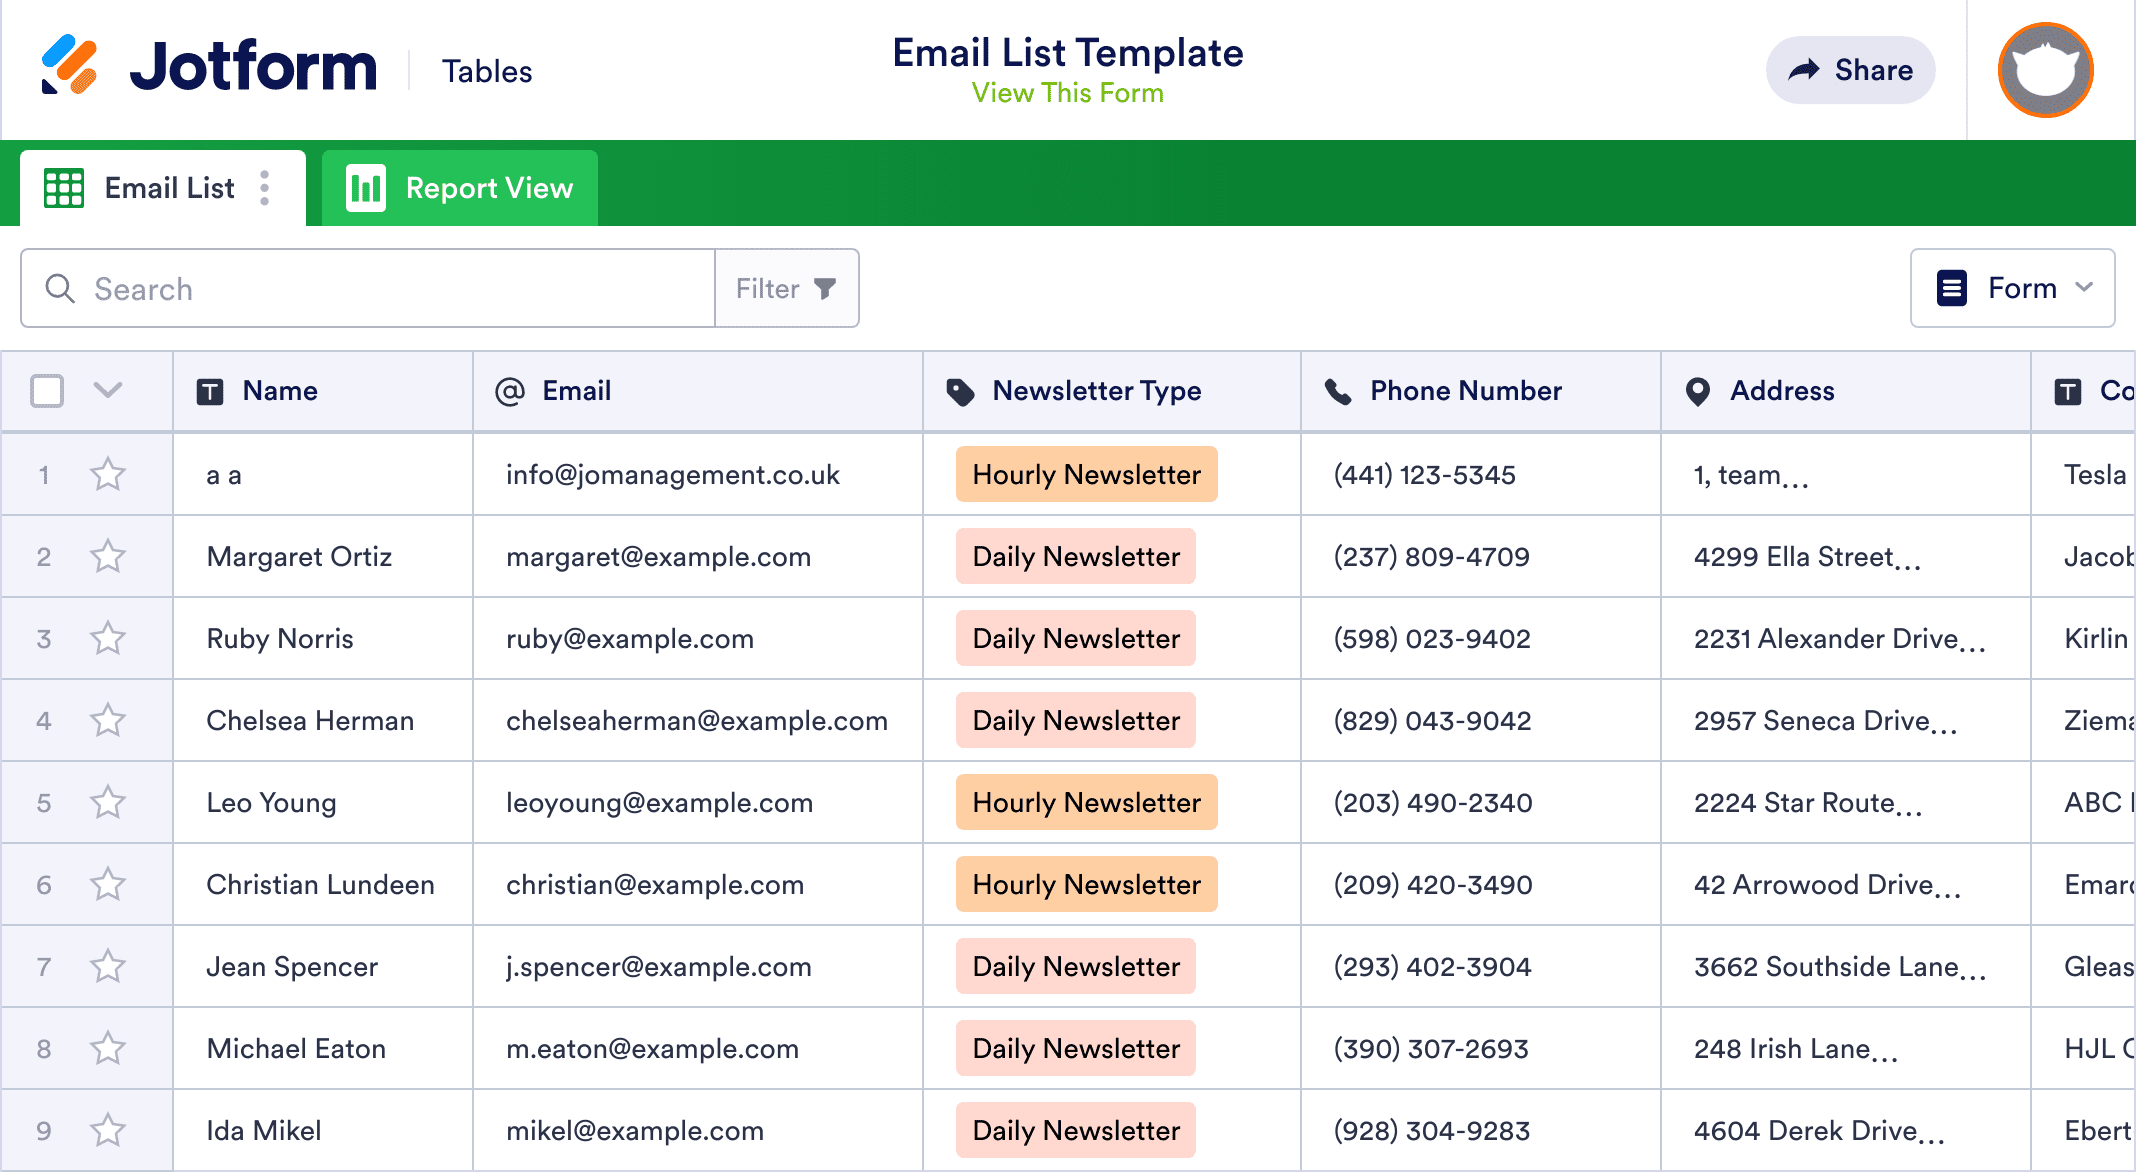 Email List Template Jotform Tables